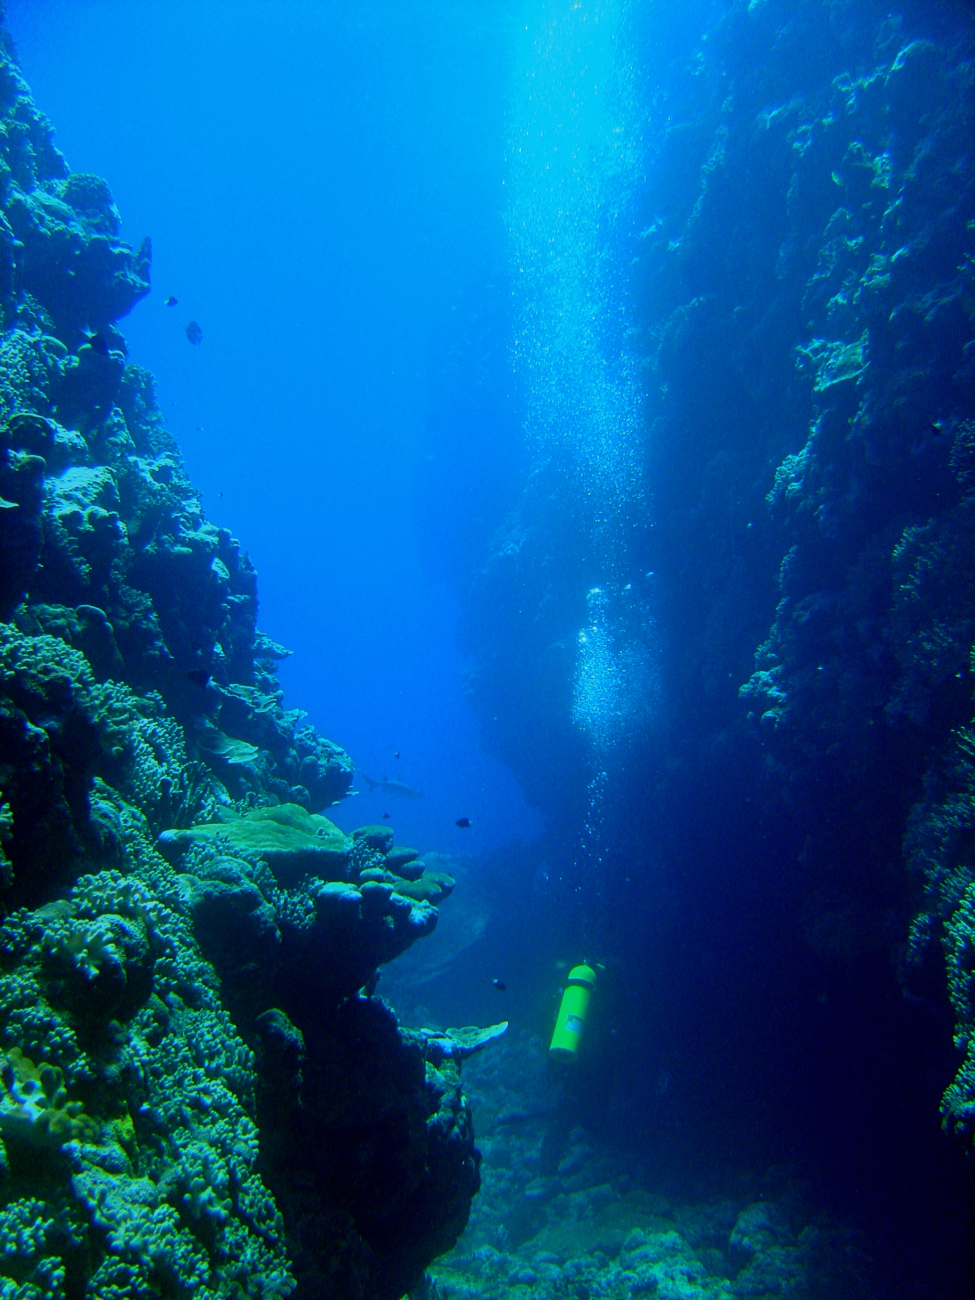 Diver between vertical walls on coral reef with shark cruising in the distance